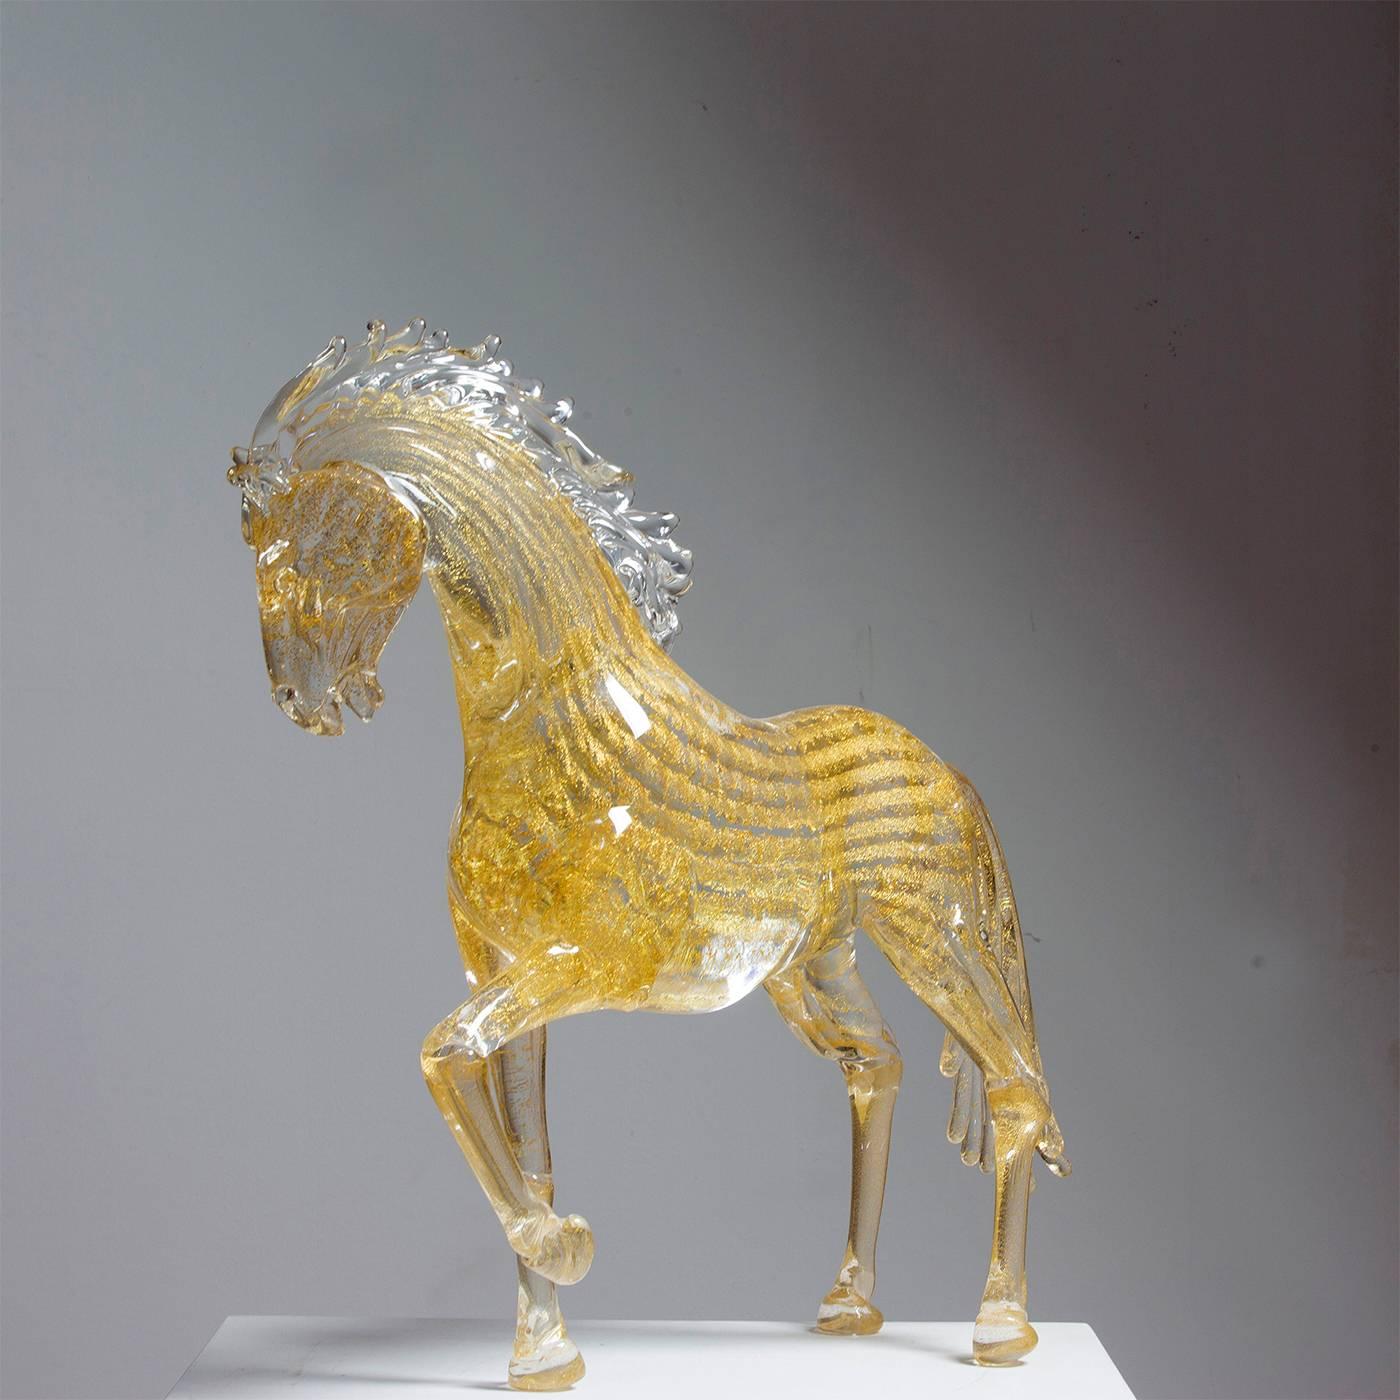 This exceptionally animated small prancing horse is entirely handmade by the master glass blower Zanetti on the island of Murano in Venice. The mane is clear while the body, tail and hooves have 24-karat gold leaf throughout. This piece makes a